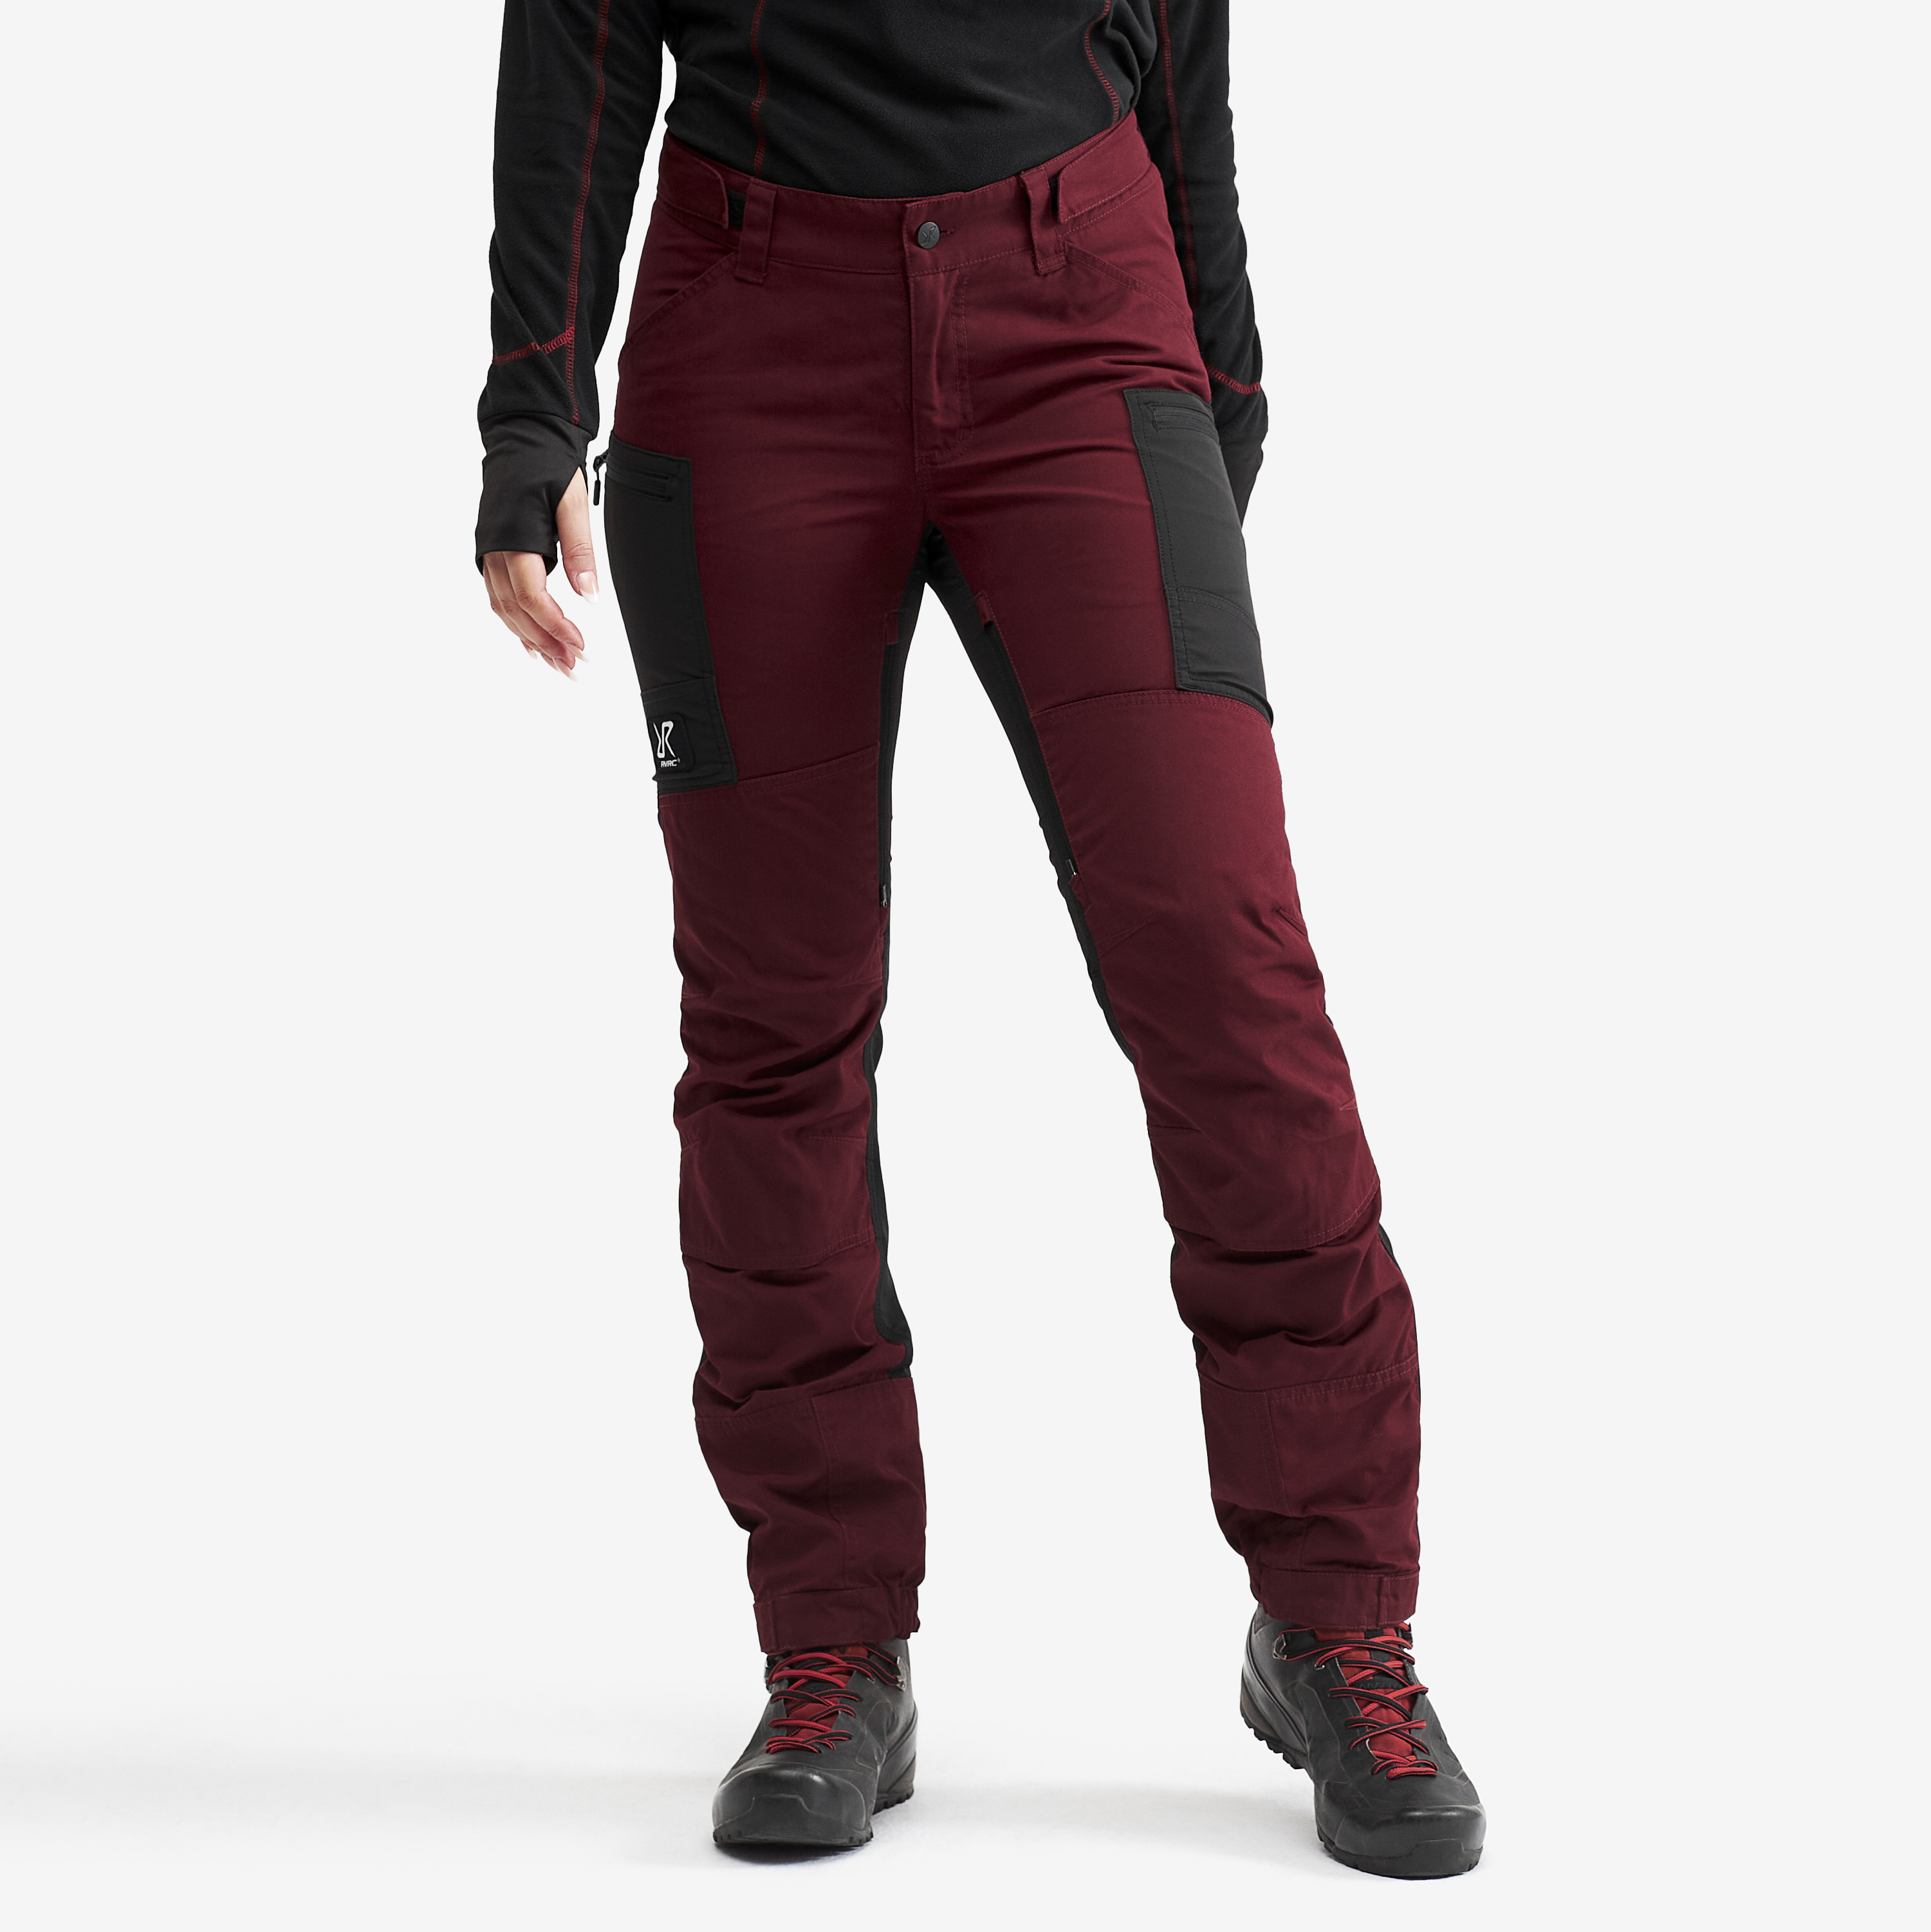 Wander Pro Trousers Bison Red Women